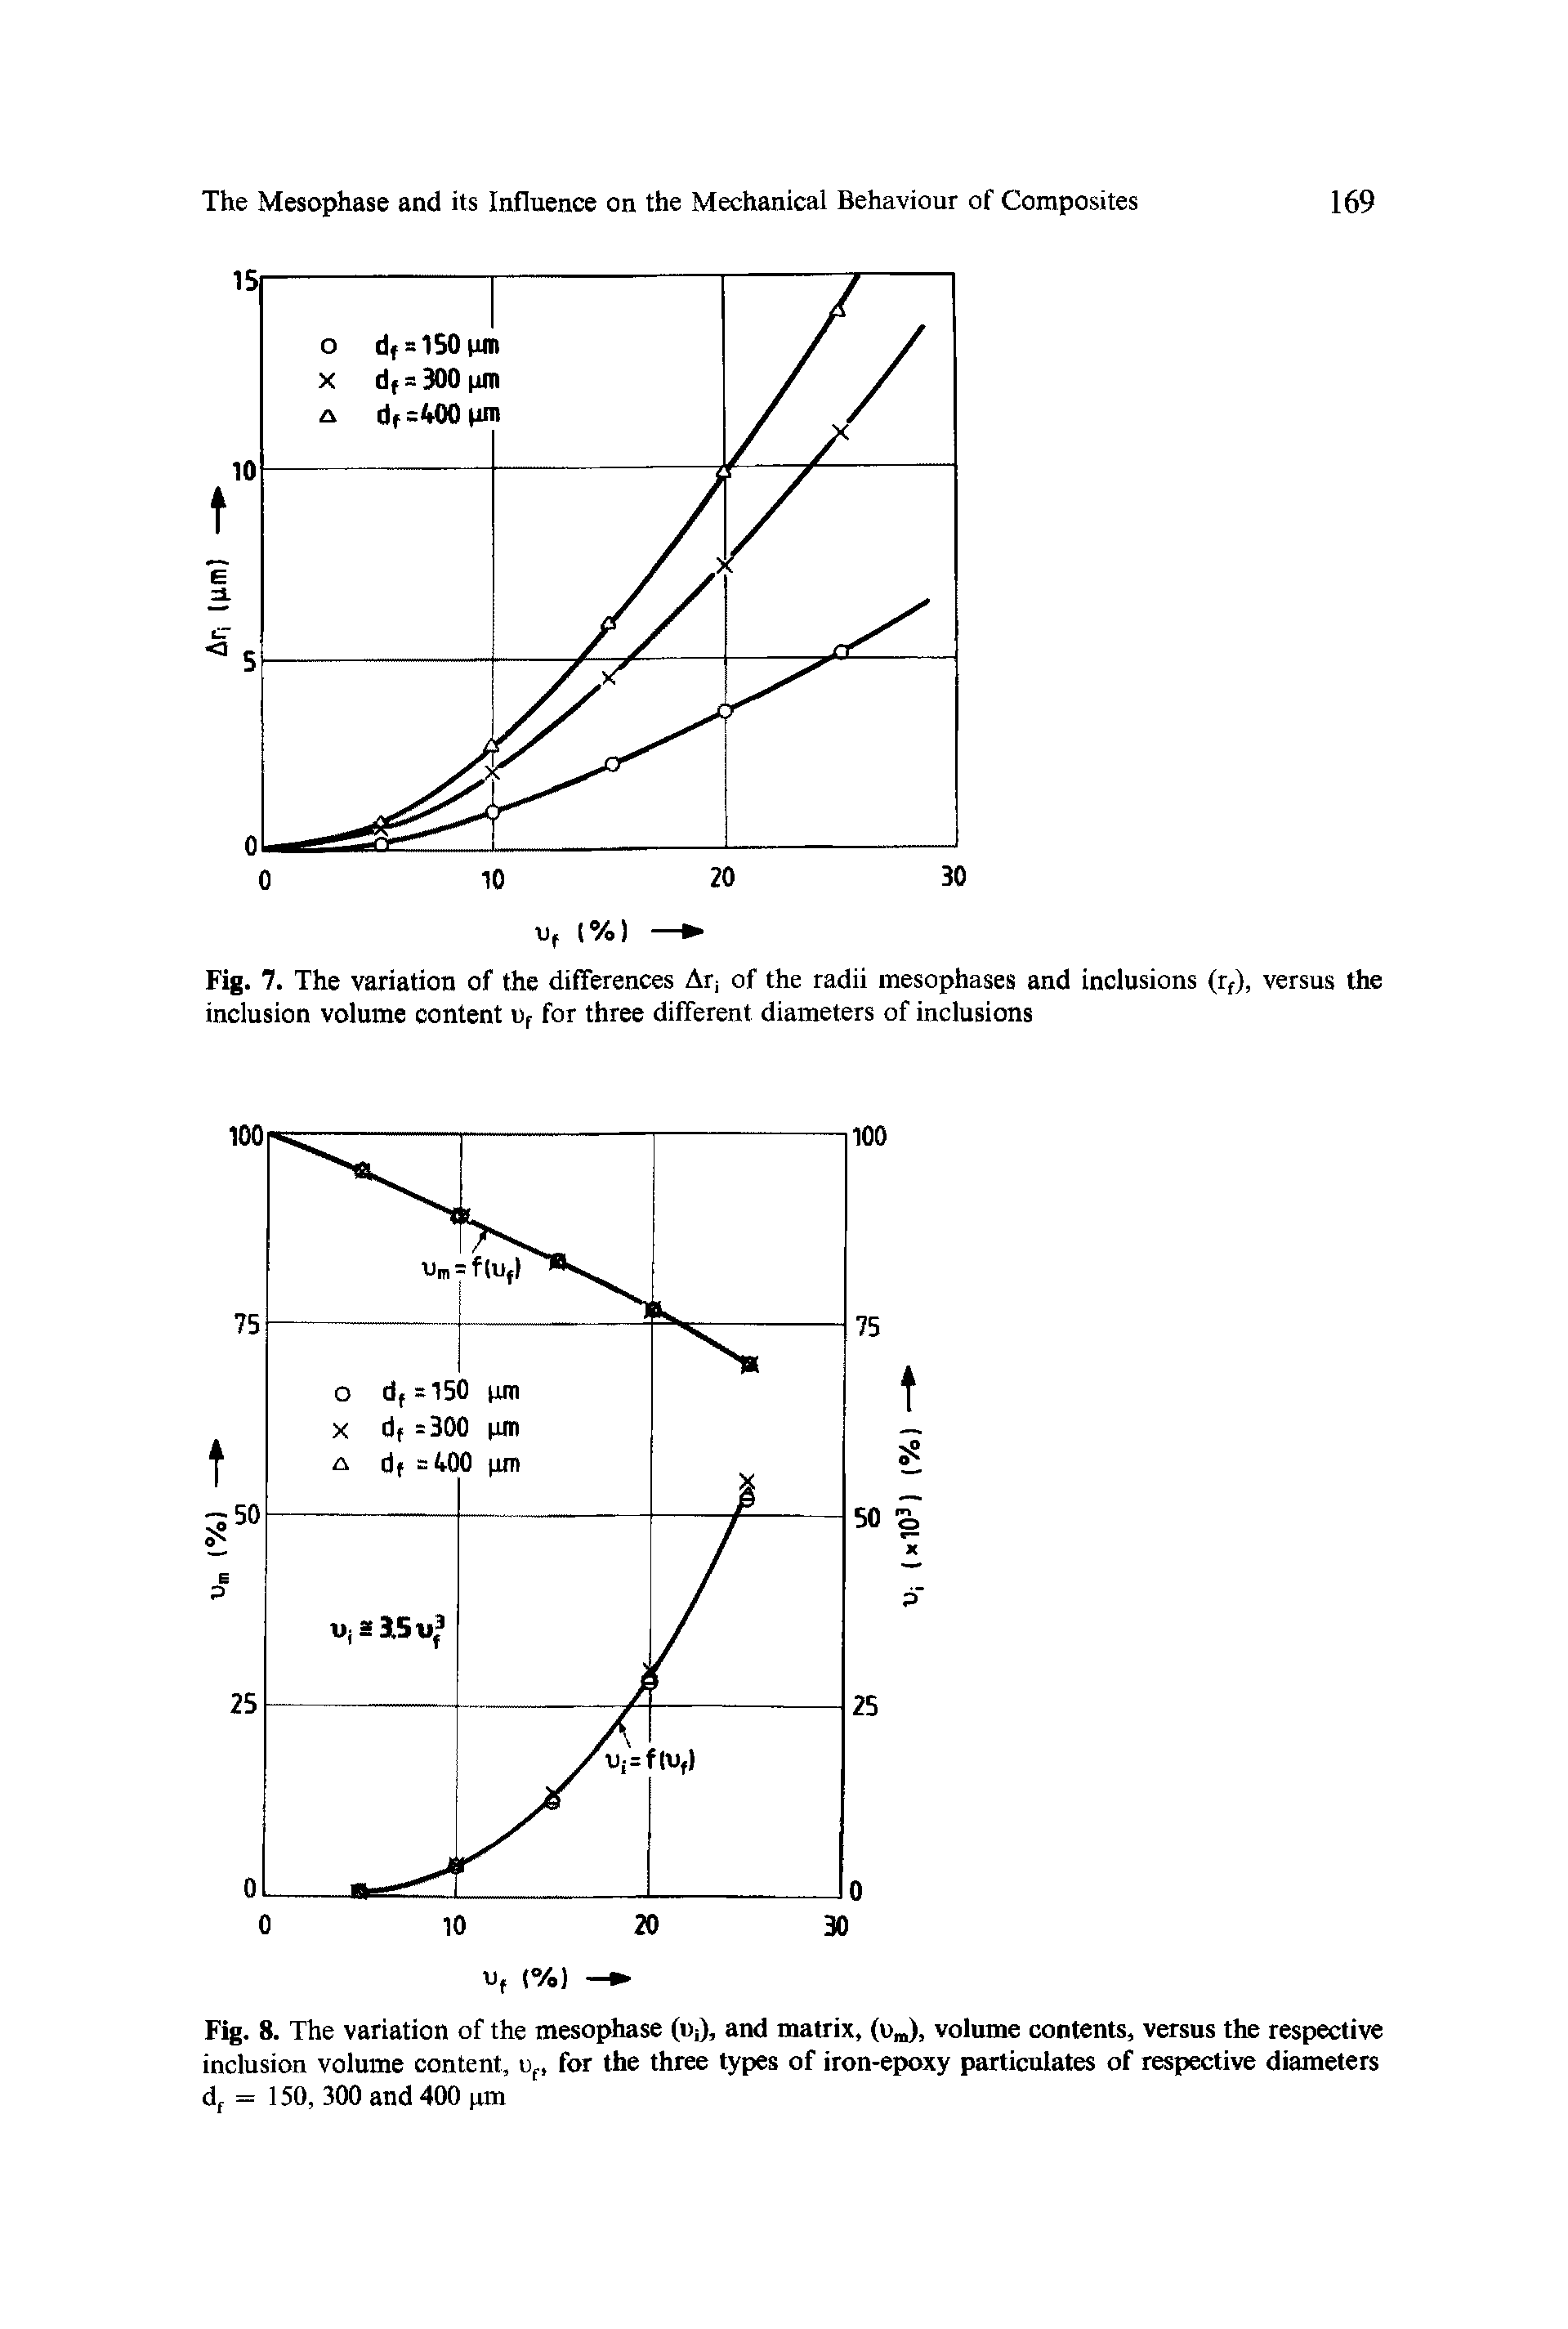 Fig. 8. The variation of the mesophase (i)j), and matrix, (vj, volume contents, versus the respective inclusion volume content, uf, for the three types of iron-epoxy particulates of respective diameters df = 150, 300 and 400 pm...